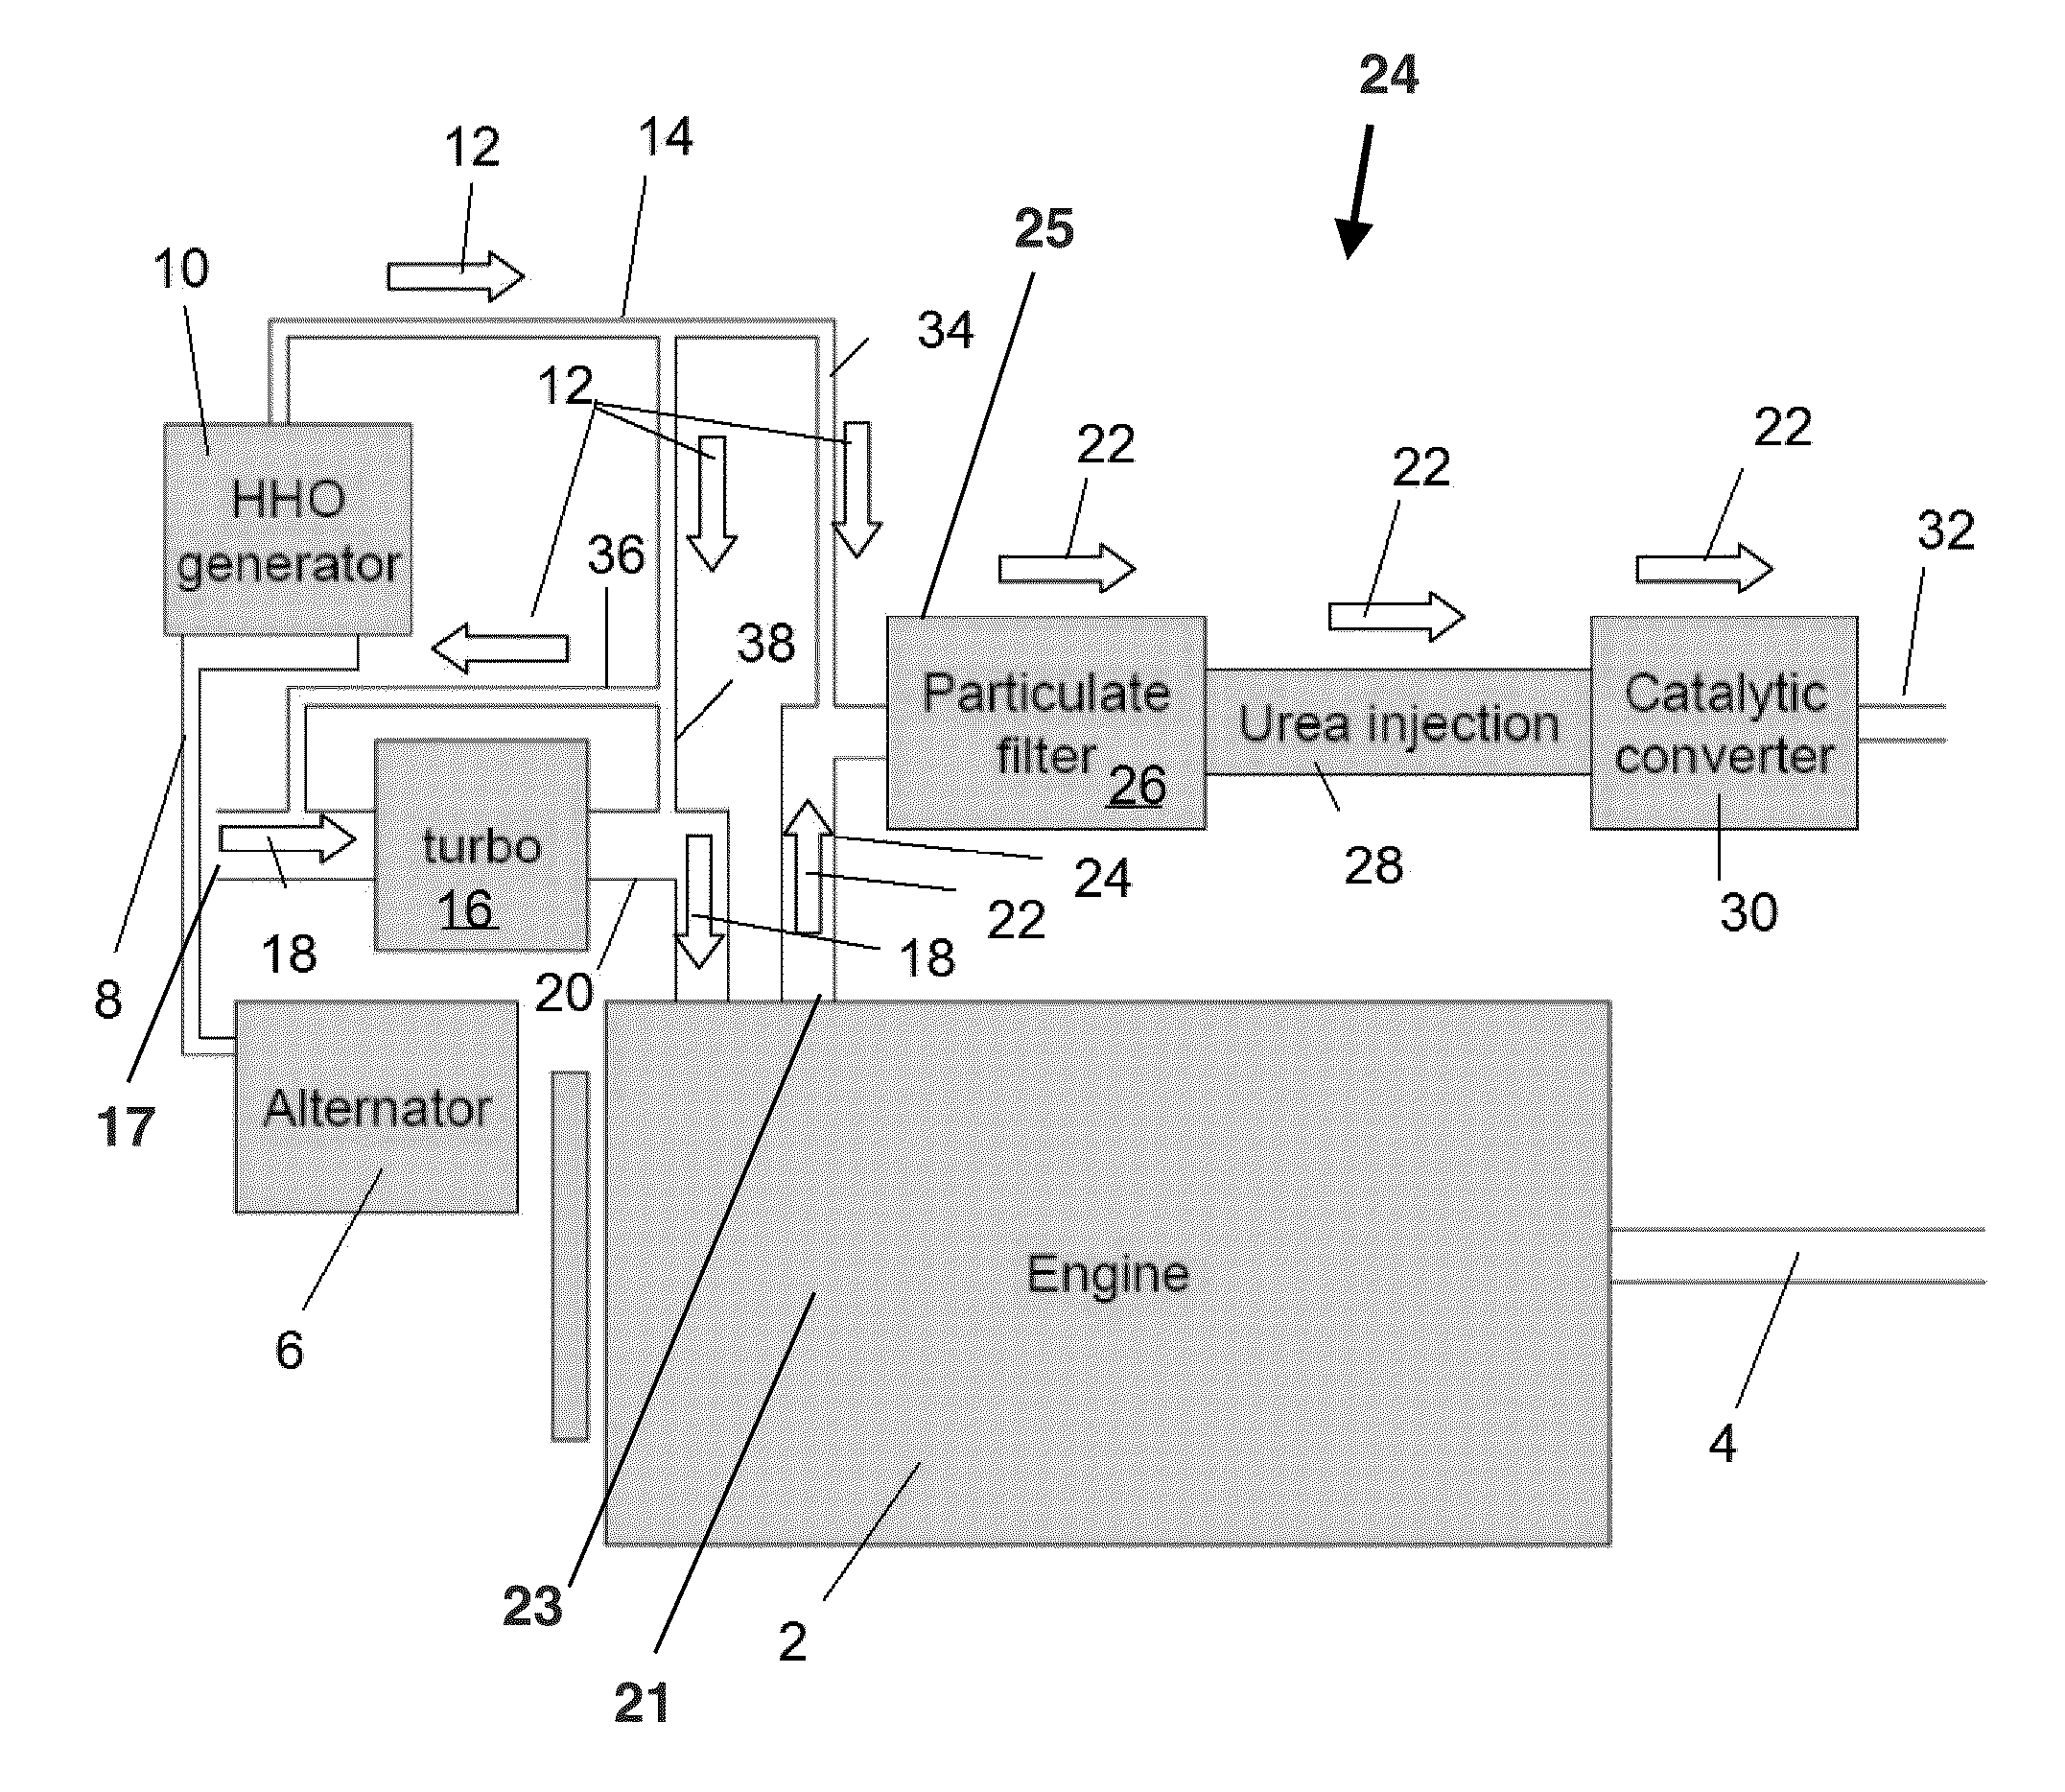 Apparatus and Method for Preventing and Removing Carbon Deposits